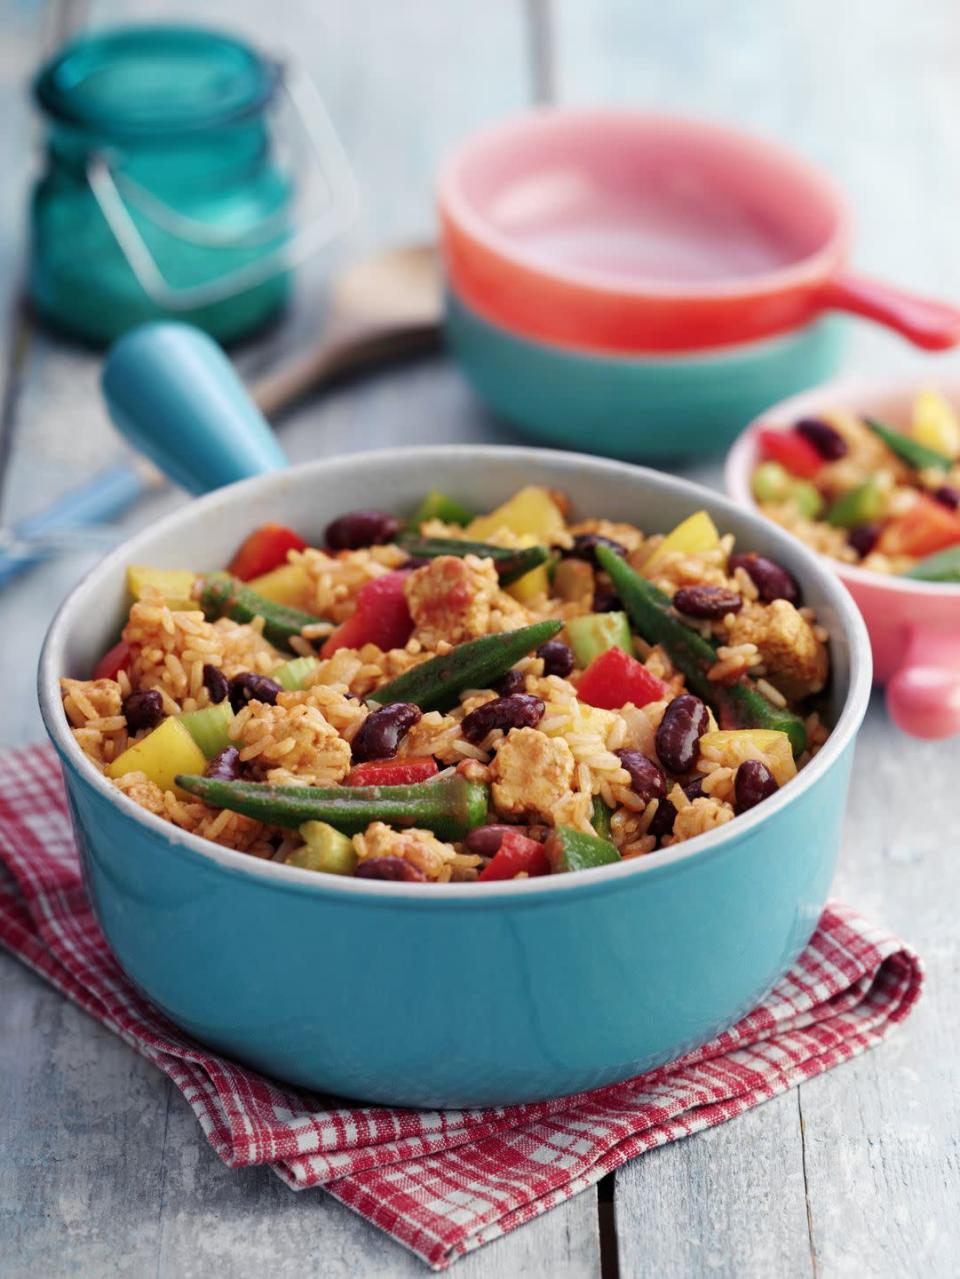 <p>Make jambalaya by combining 3/4 cup cooked brown rice; 1/2 cup corn; 2 ounces cooked turkey sausage, sliced; 1/3 cup salsa; and 1/4 cup <a href="https://www.goodhousekeeping.com/health/diet-nutrition/g5147/healthy-canned-foods/" rel="nofollow noopener" target="_blank" data-ylk="slk:no-salt-added black or navy beans" class="link rapid-noclick-resp">no-salt-added black or navy beans</a>. Heat through. Eat with 3 cups spinach sautéed with garlic in 1 tablespoon olive oil.</p><p><strong>RELATED: <a href="https://www.goodhousekeeping.com/health/diet-nutrition/g5147/healthy-canned-foods/" rel="nofollow noopener" target="_blank" data-ylk="slk:30 Healthy Canned Foods You Should Add to Your Pantry" class="link rapid-noclick-resp">30 Healthy Canned Foods You Should Add to Your Pantry</a></strong></p>